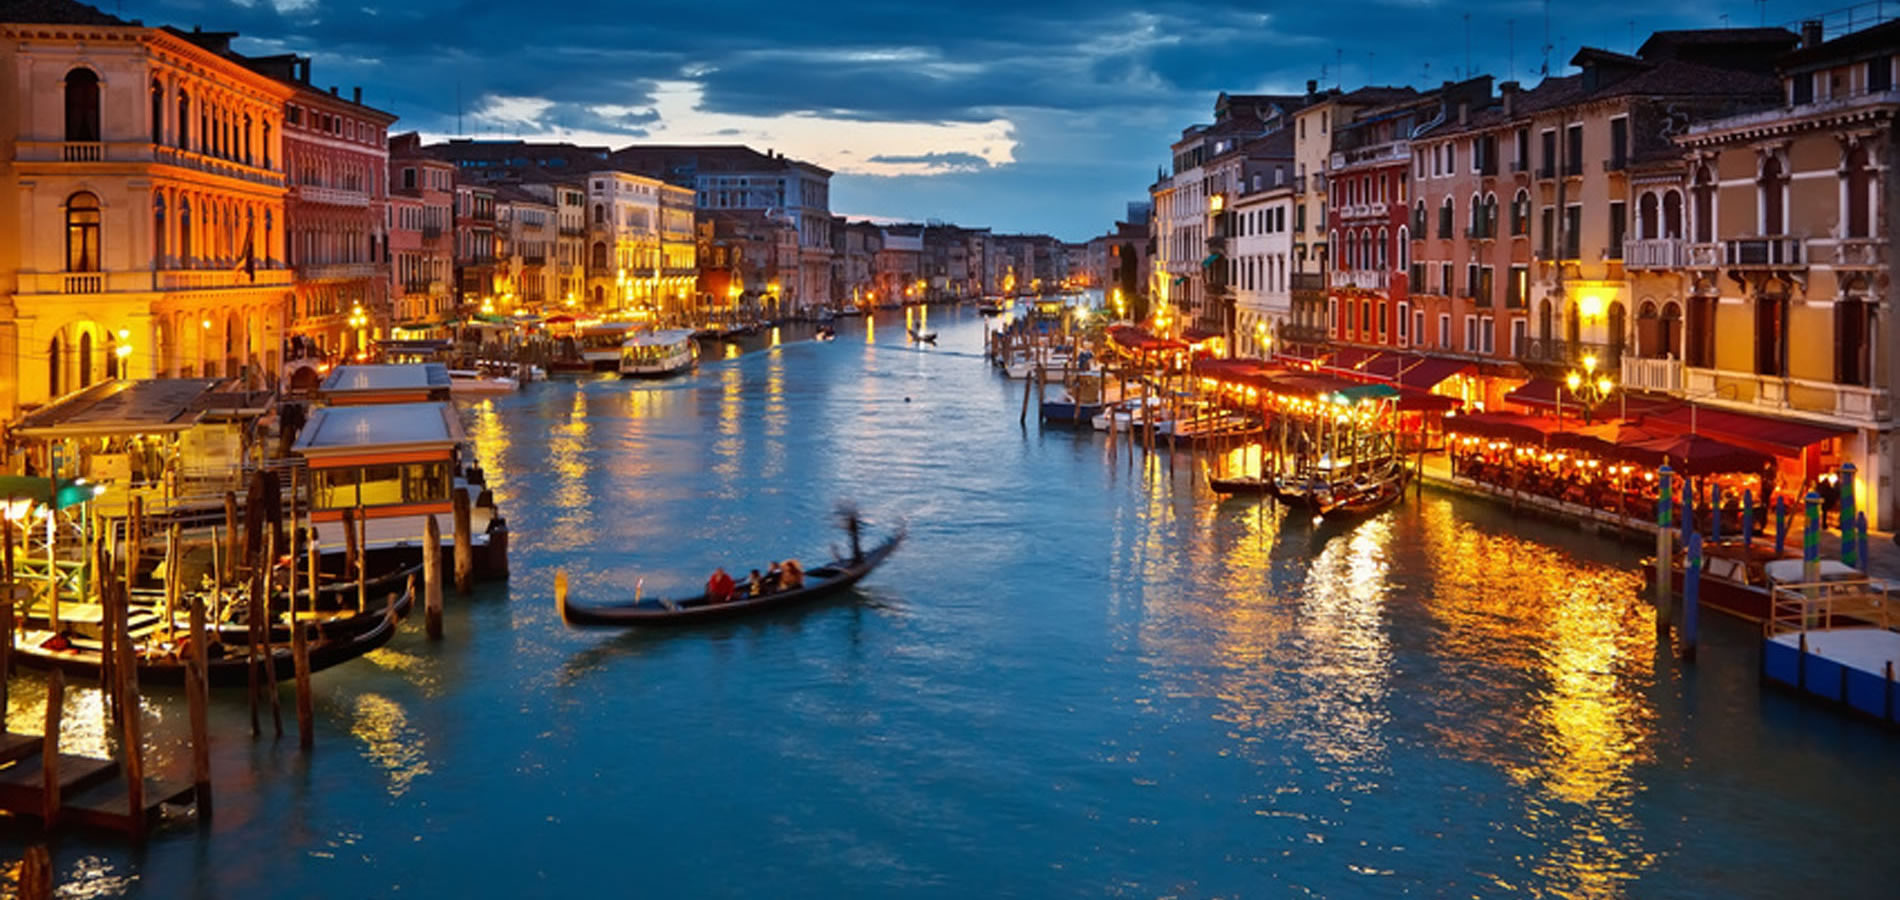 Venice Private Transfers - to/from any location by boat